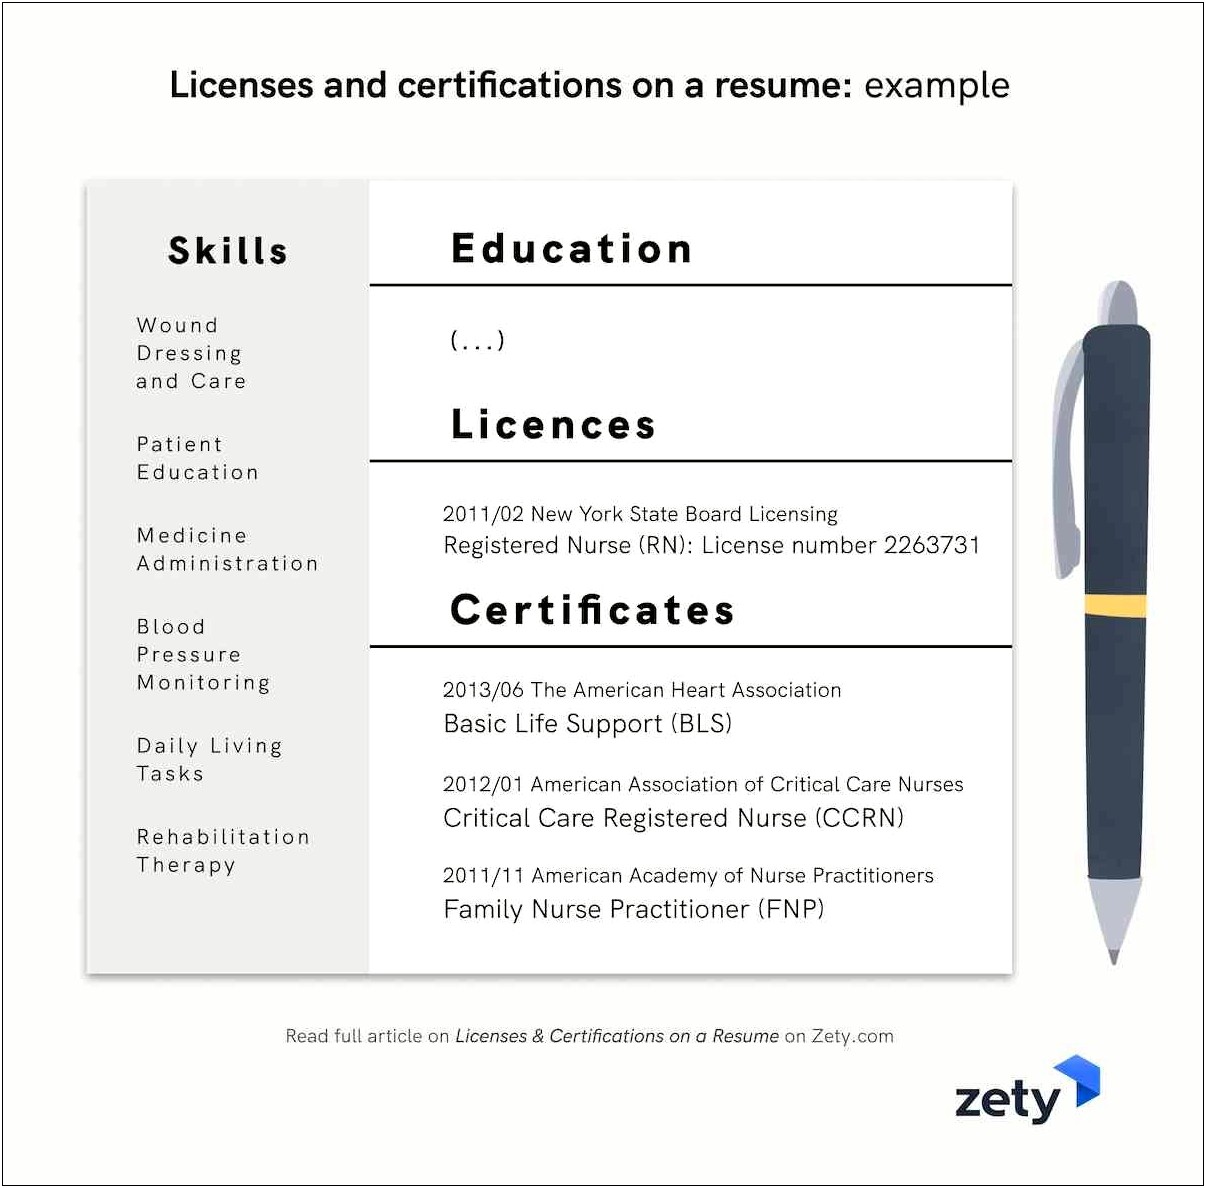 Where To Put Professional Certifications On A Resume